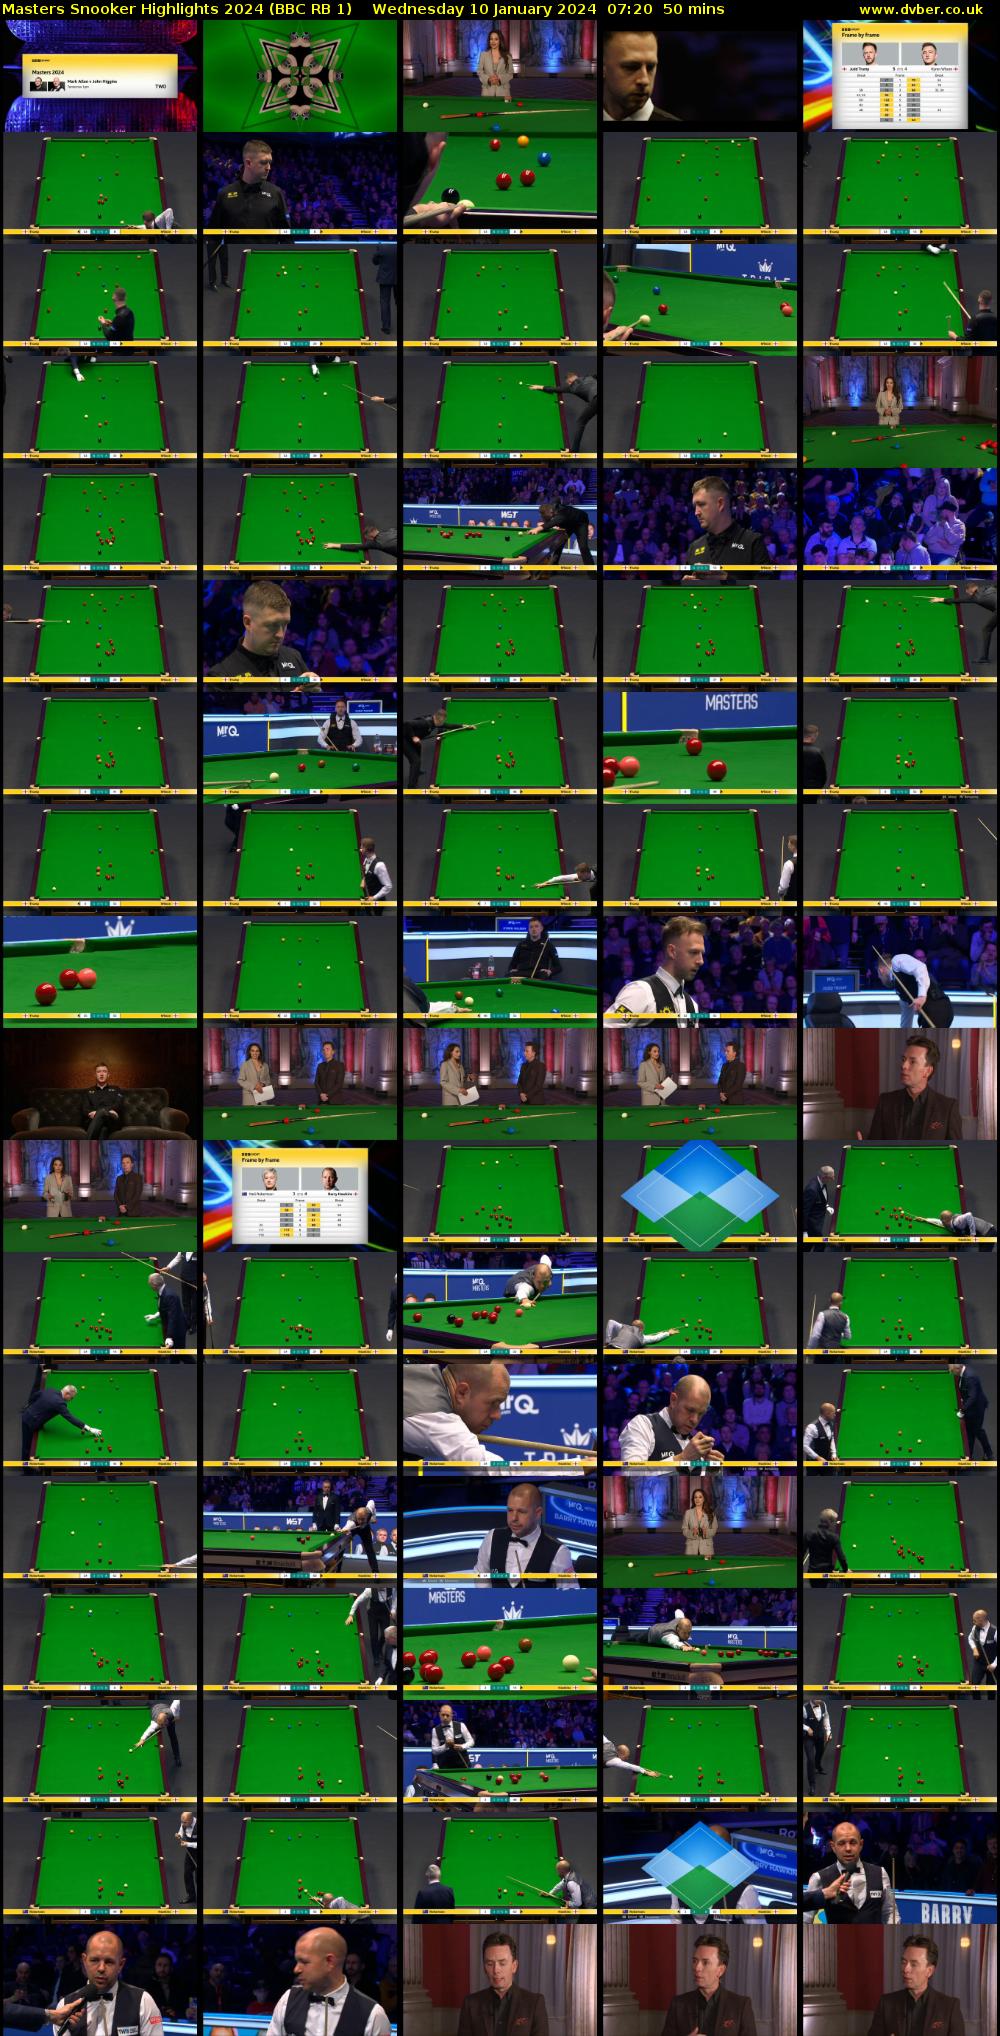 Masters Snooker Highlights 2024 (BBC RB 1) Wednesday 10 January 2024 07:20 - 08:10